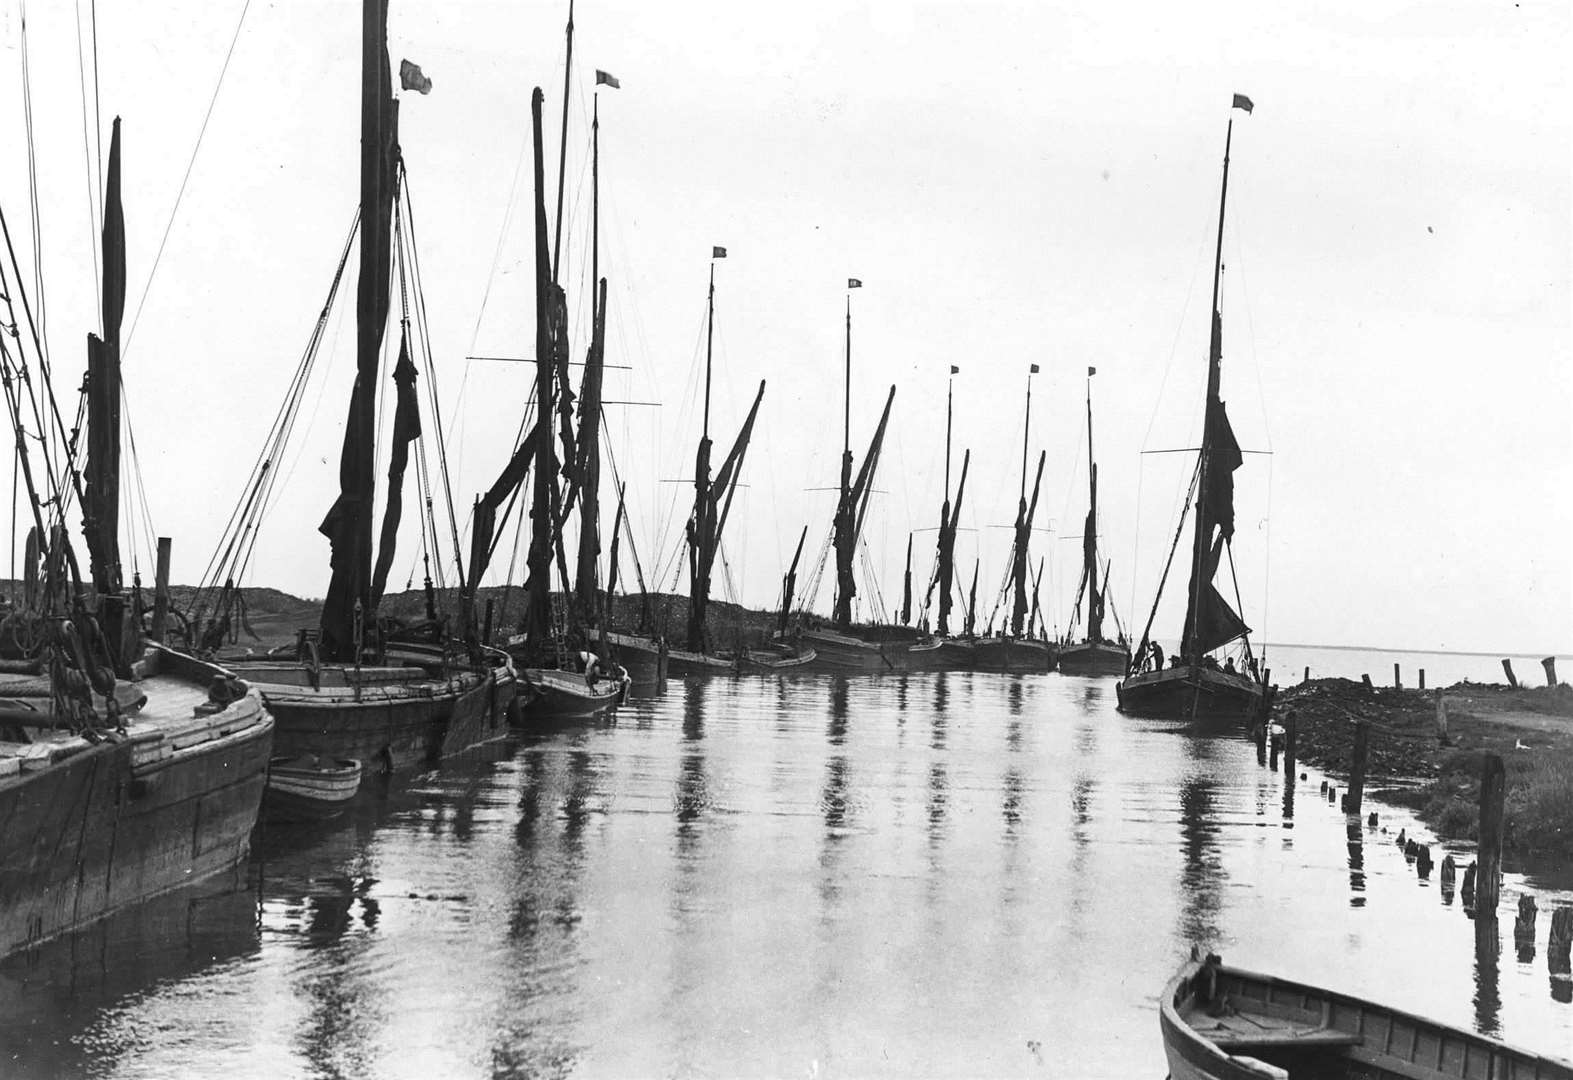 Barges line up in the creek at Lower Halstow waiting to be loaded from the brickworks in 1934